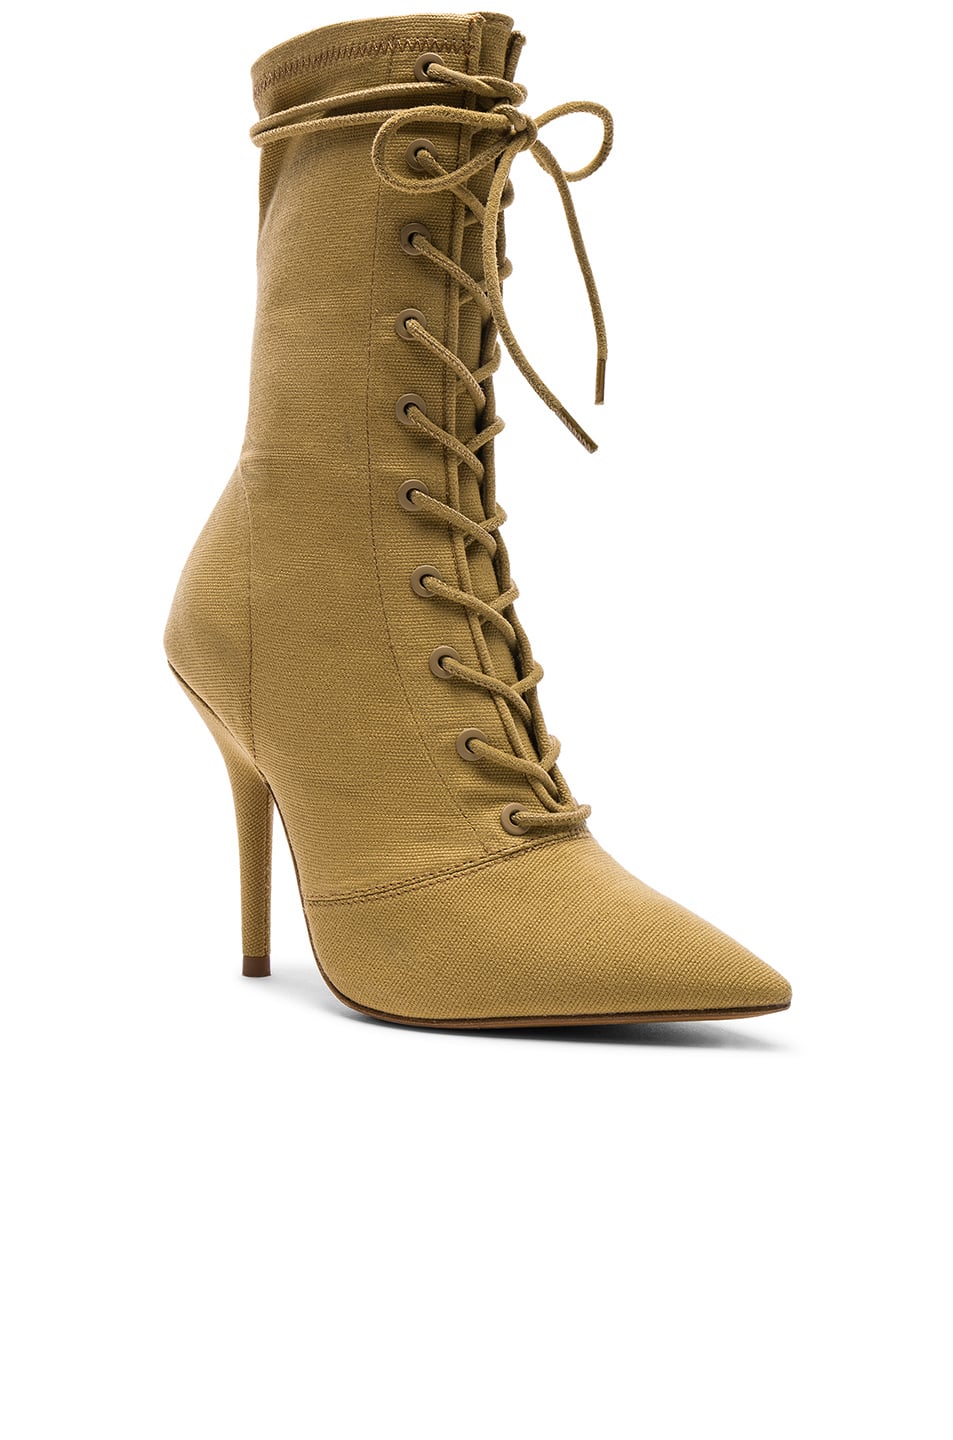 lont Productie doel Our Pick: Yeezy Season 6 Stretch Canvas Lace Up Ankle Boots in Dollar |  It's Impossible For Kylie Jenner to Get Cold Feet About Anything — Not in  These Hot, Sexy Shoes 